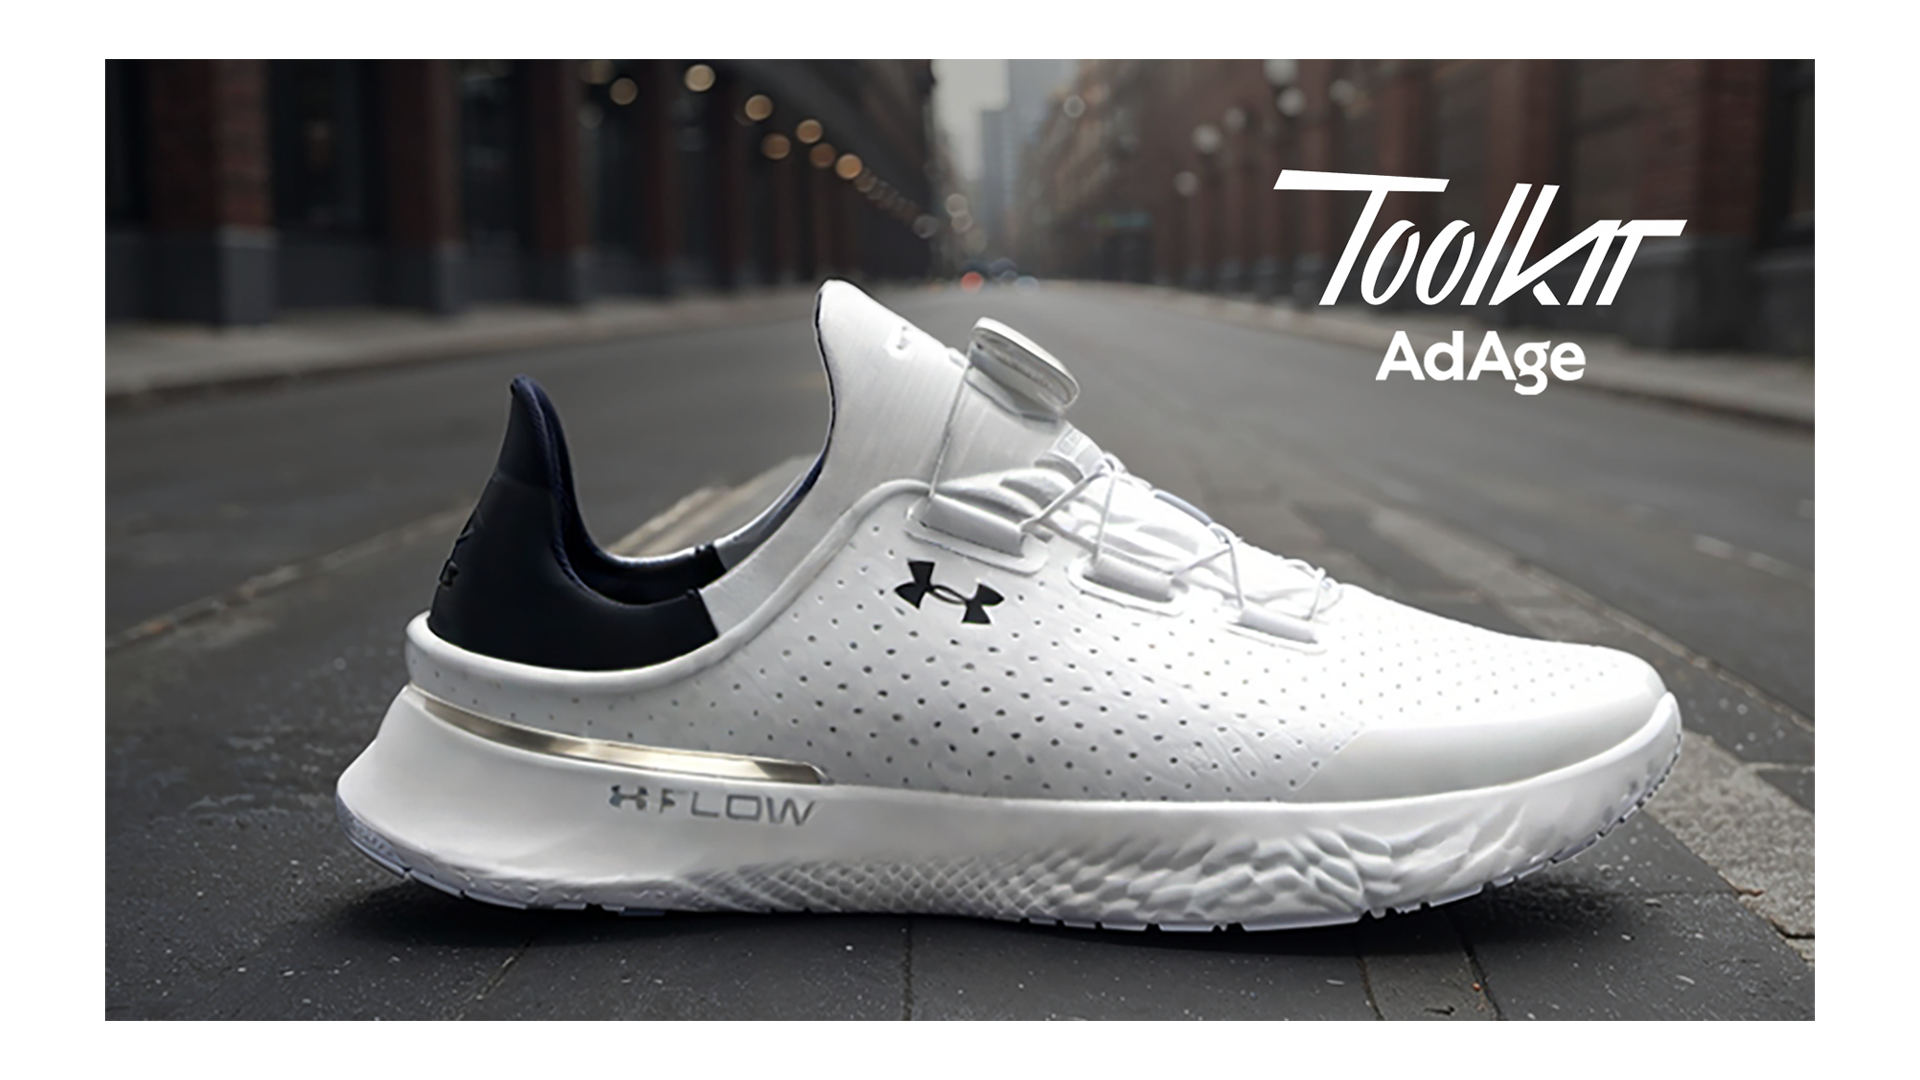 AI marketing tool generates ad-ready images for Under Armour